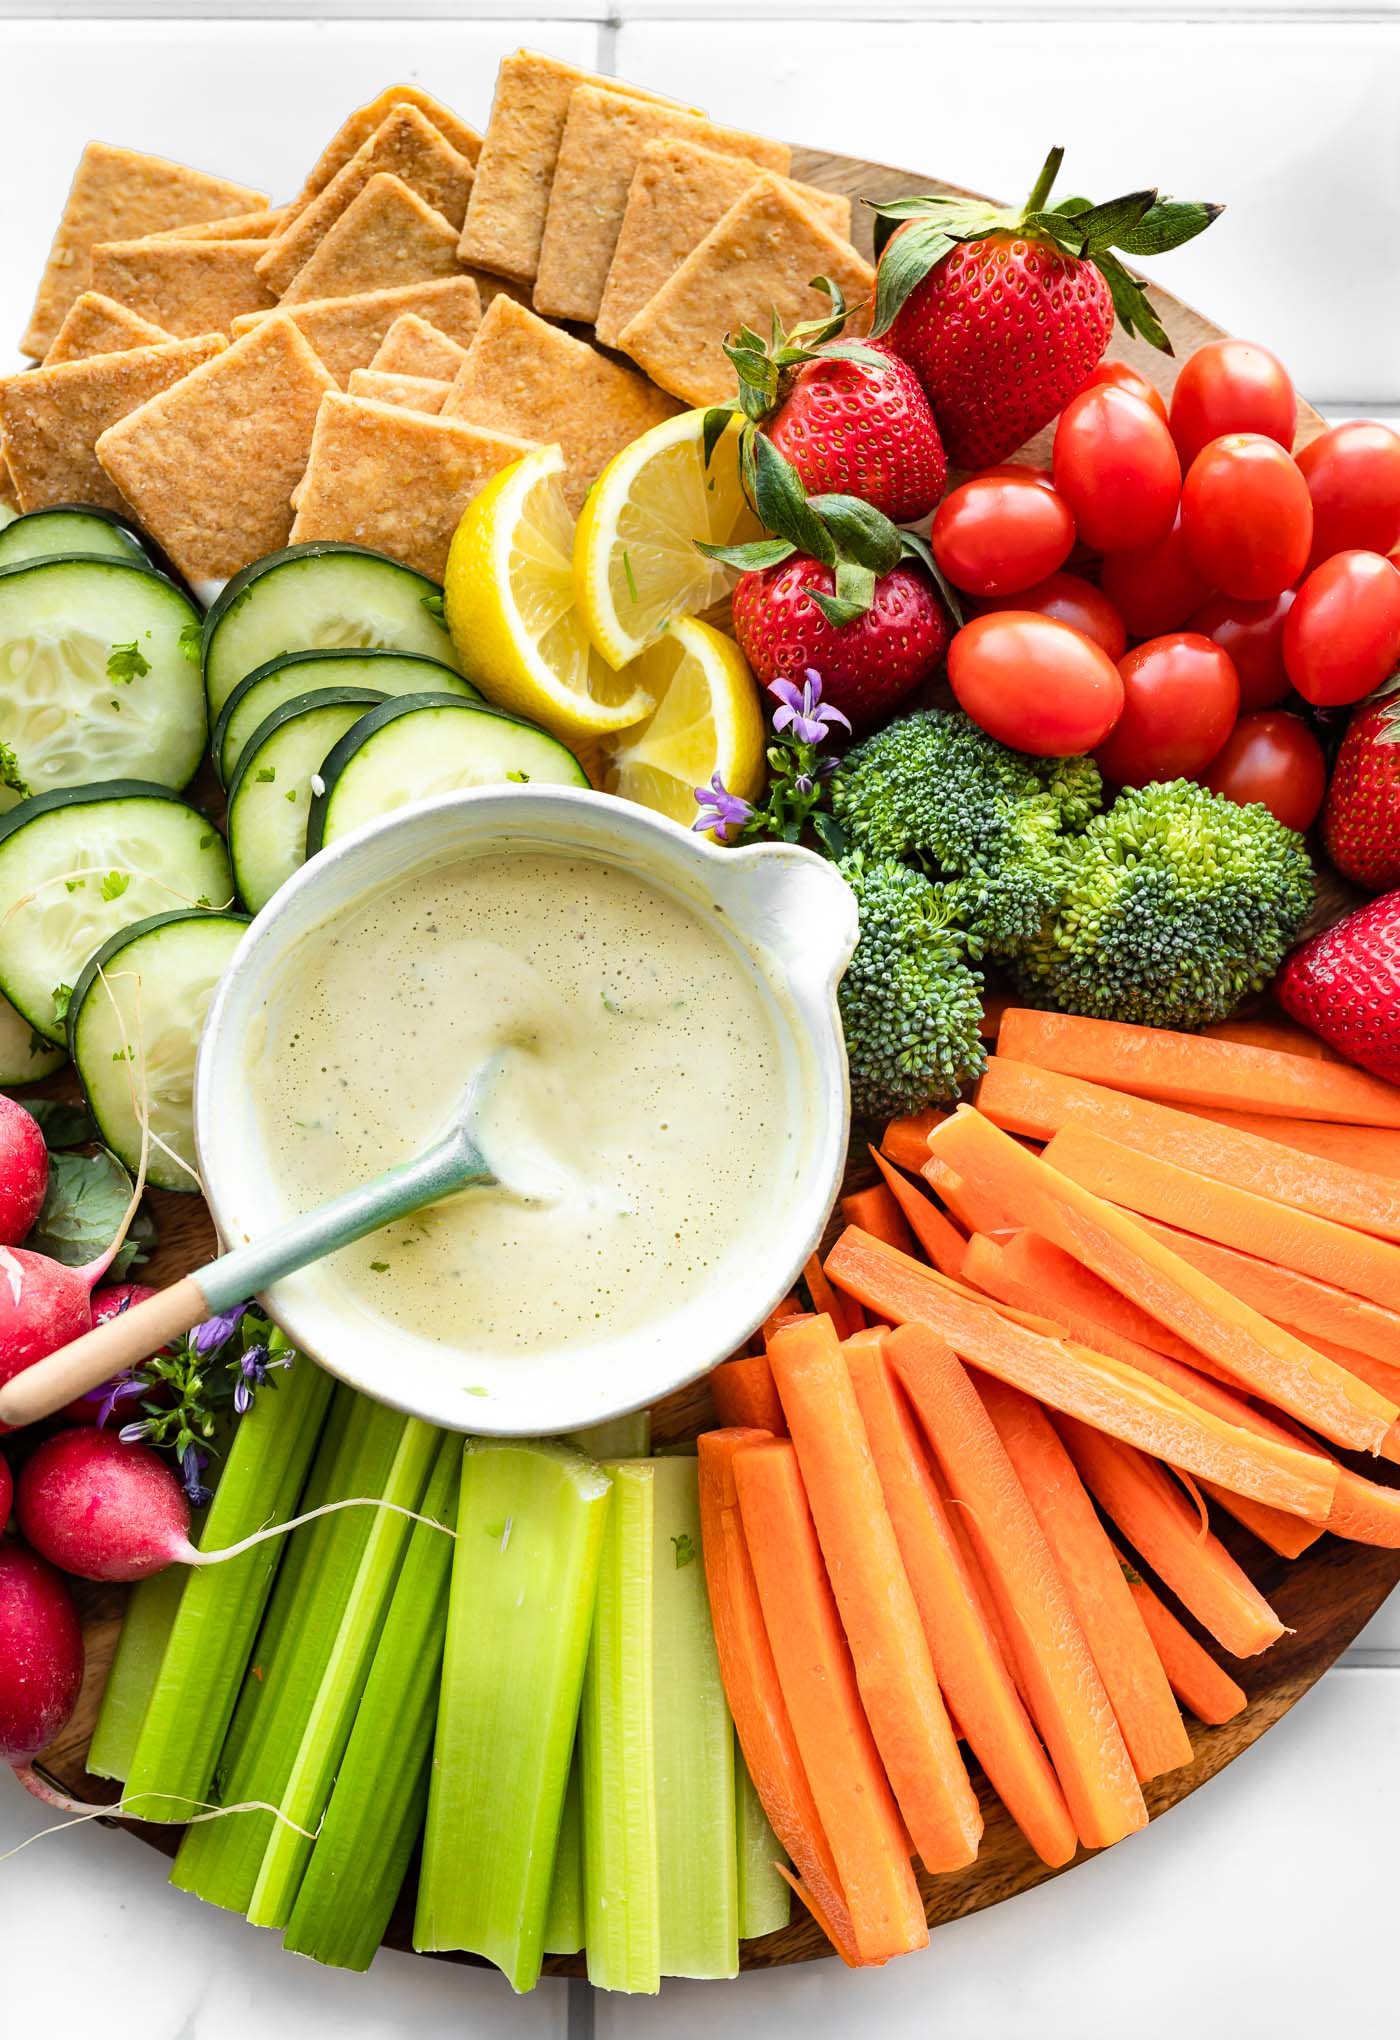 a snack platter with celery sticks, carrot sticks, broccoli, strawberries, grape tomatoes, gluten free crackers, lemon wedges, cucumber sliced, radishes, and a bowl of homemade vegan ranch recipe in the center